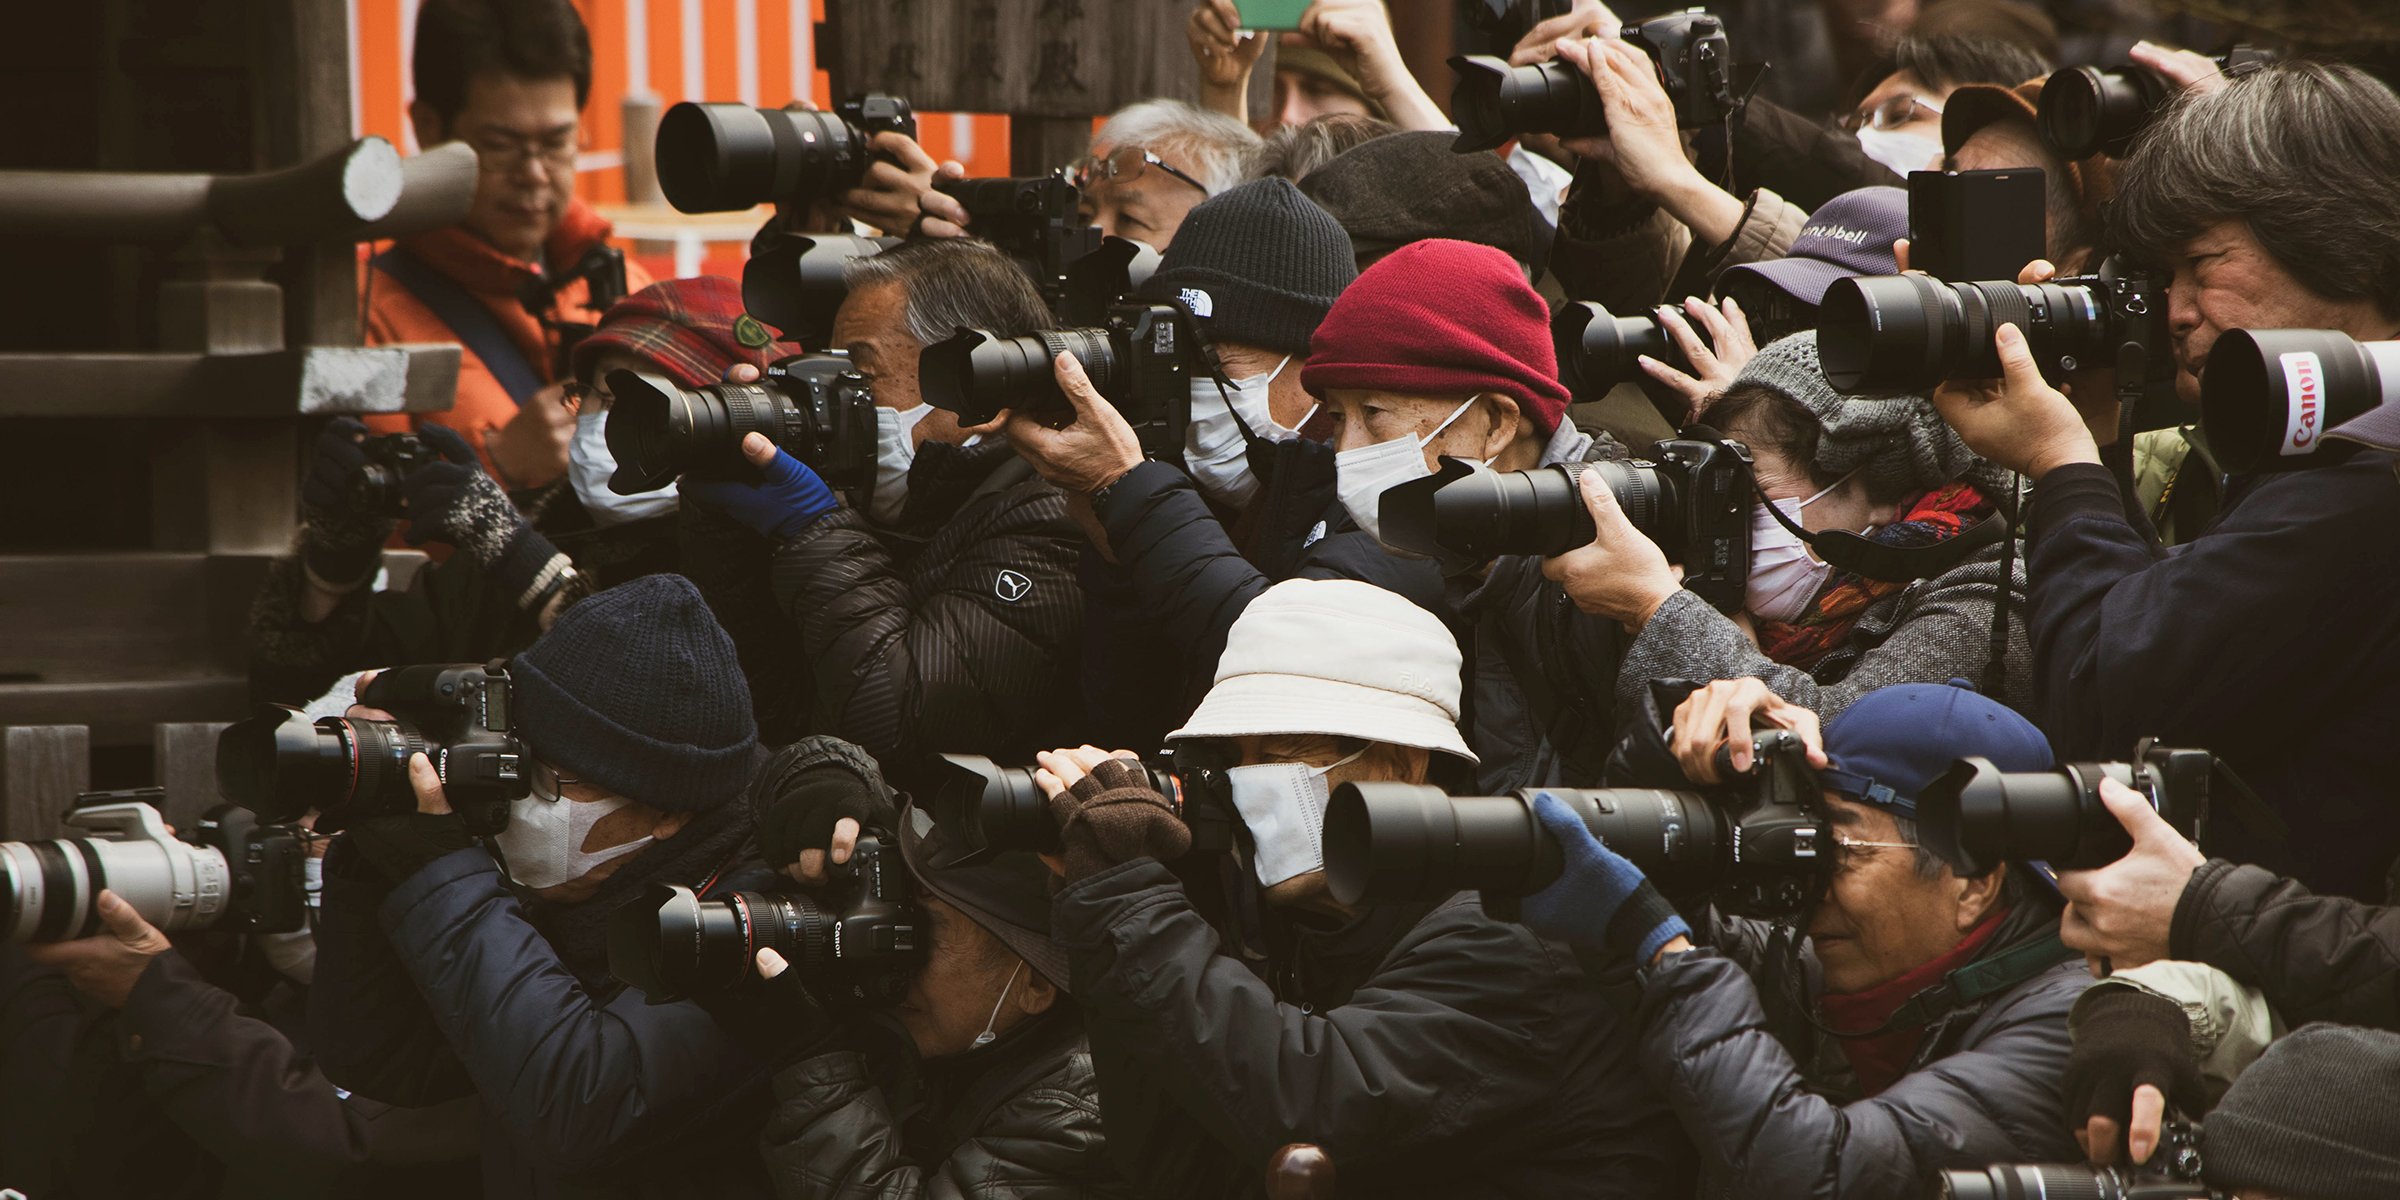 Photographers taking pictures | Source: Unsplash